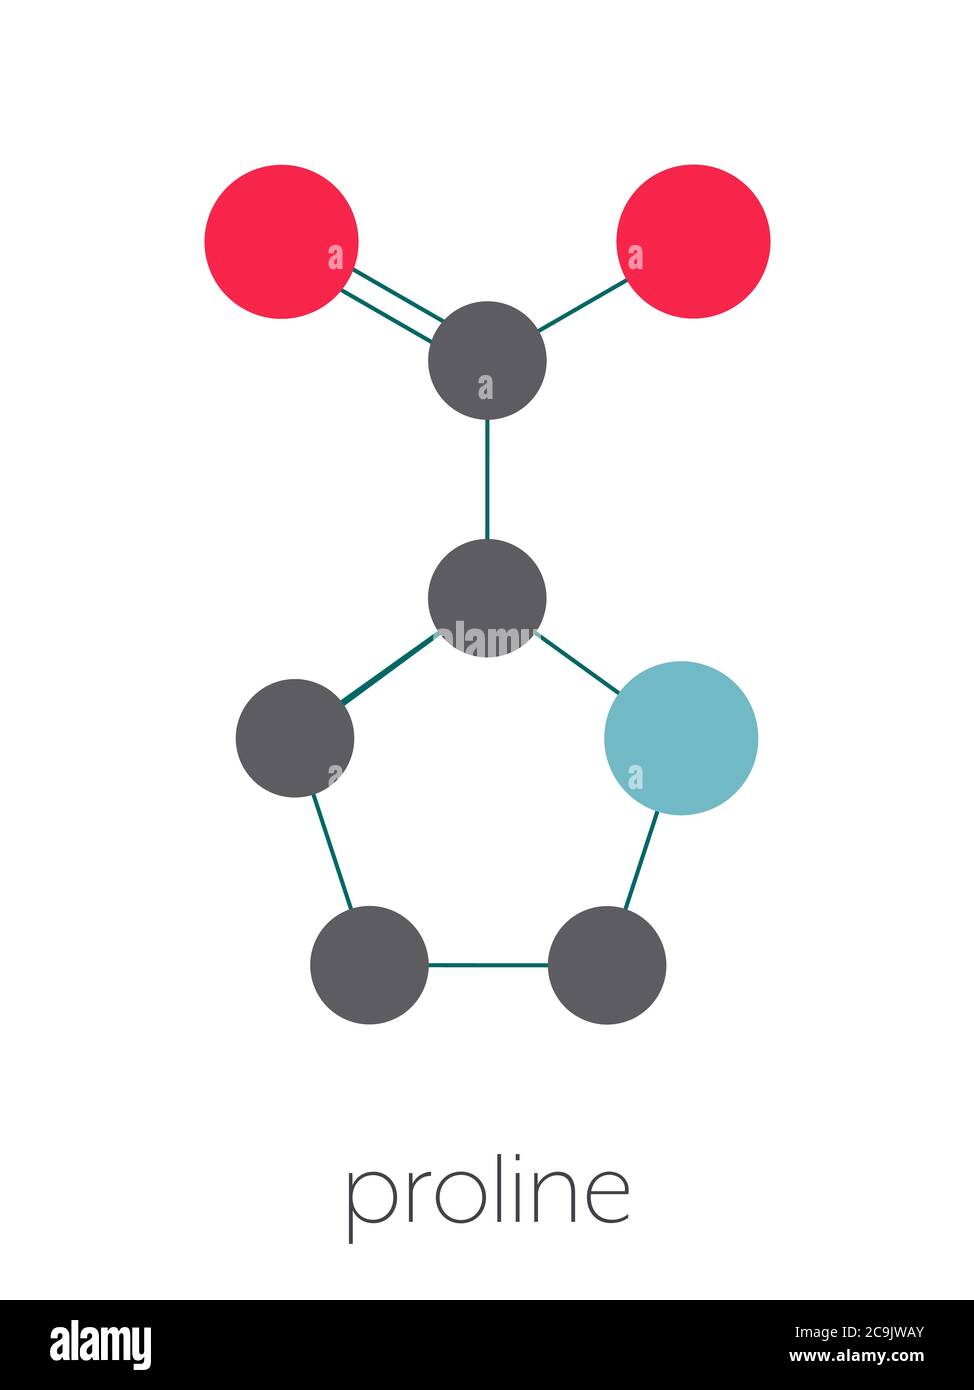 Proline (l-proline, Pro) amino acid molecule. Stylized skeletal formula (chemical structure). Atoms are shown as color-coded circles connected by thin Stock Photo